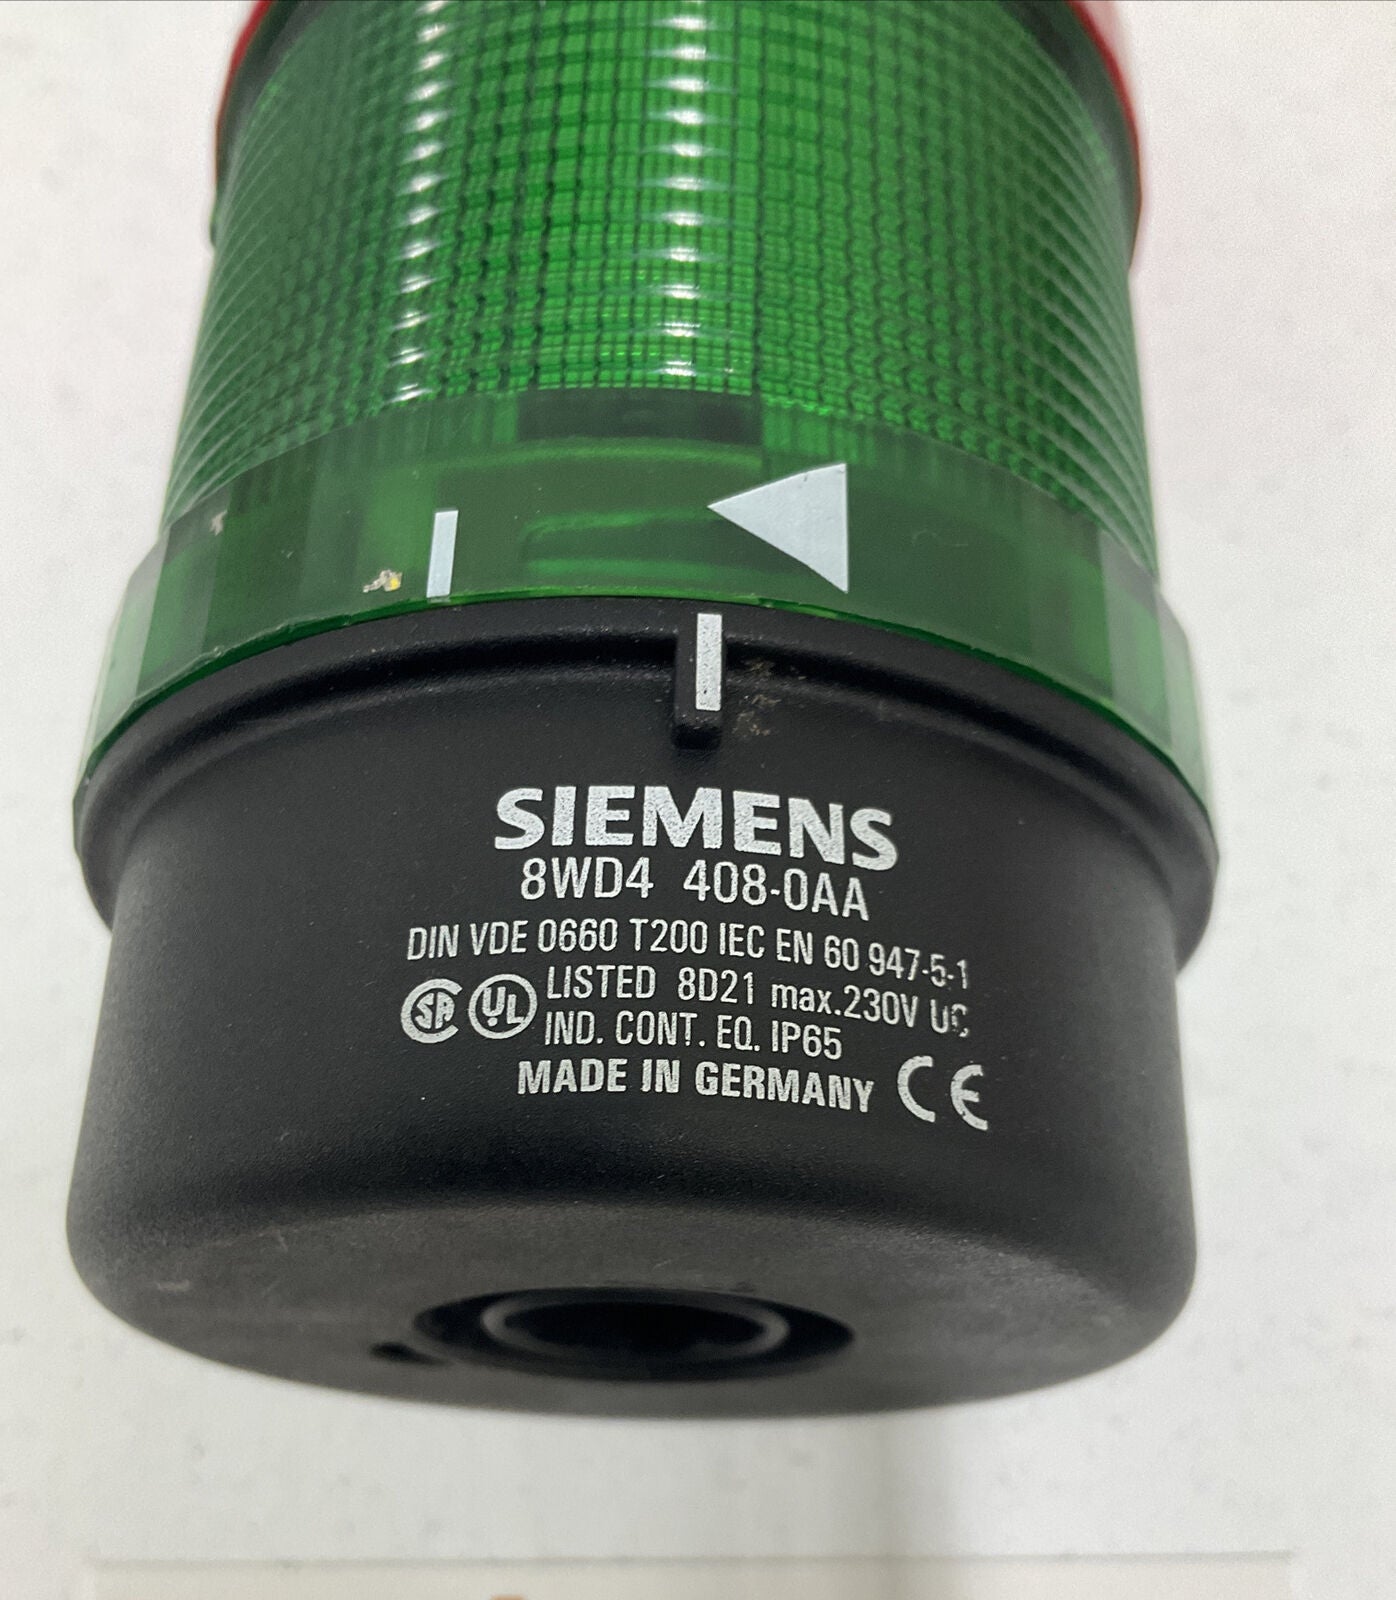 Siemens 8WD4 408-0AA Safety Stack Light Base w/ Red & Green Lenses (CL197) - 0